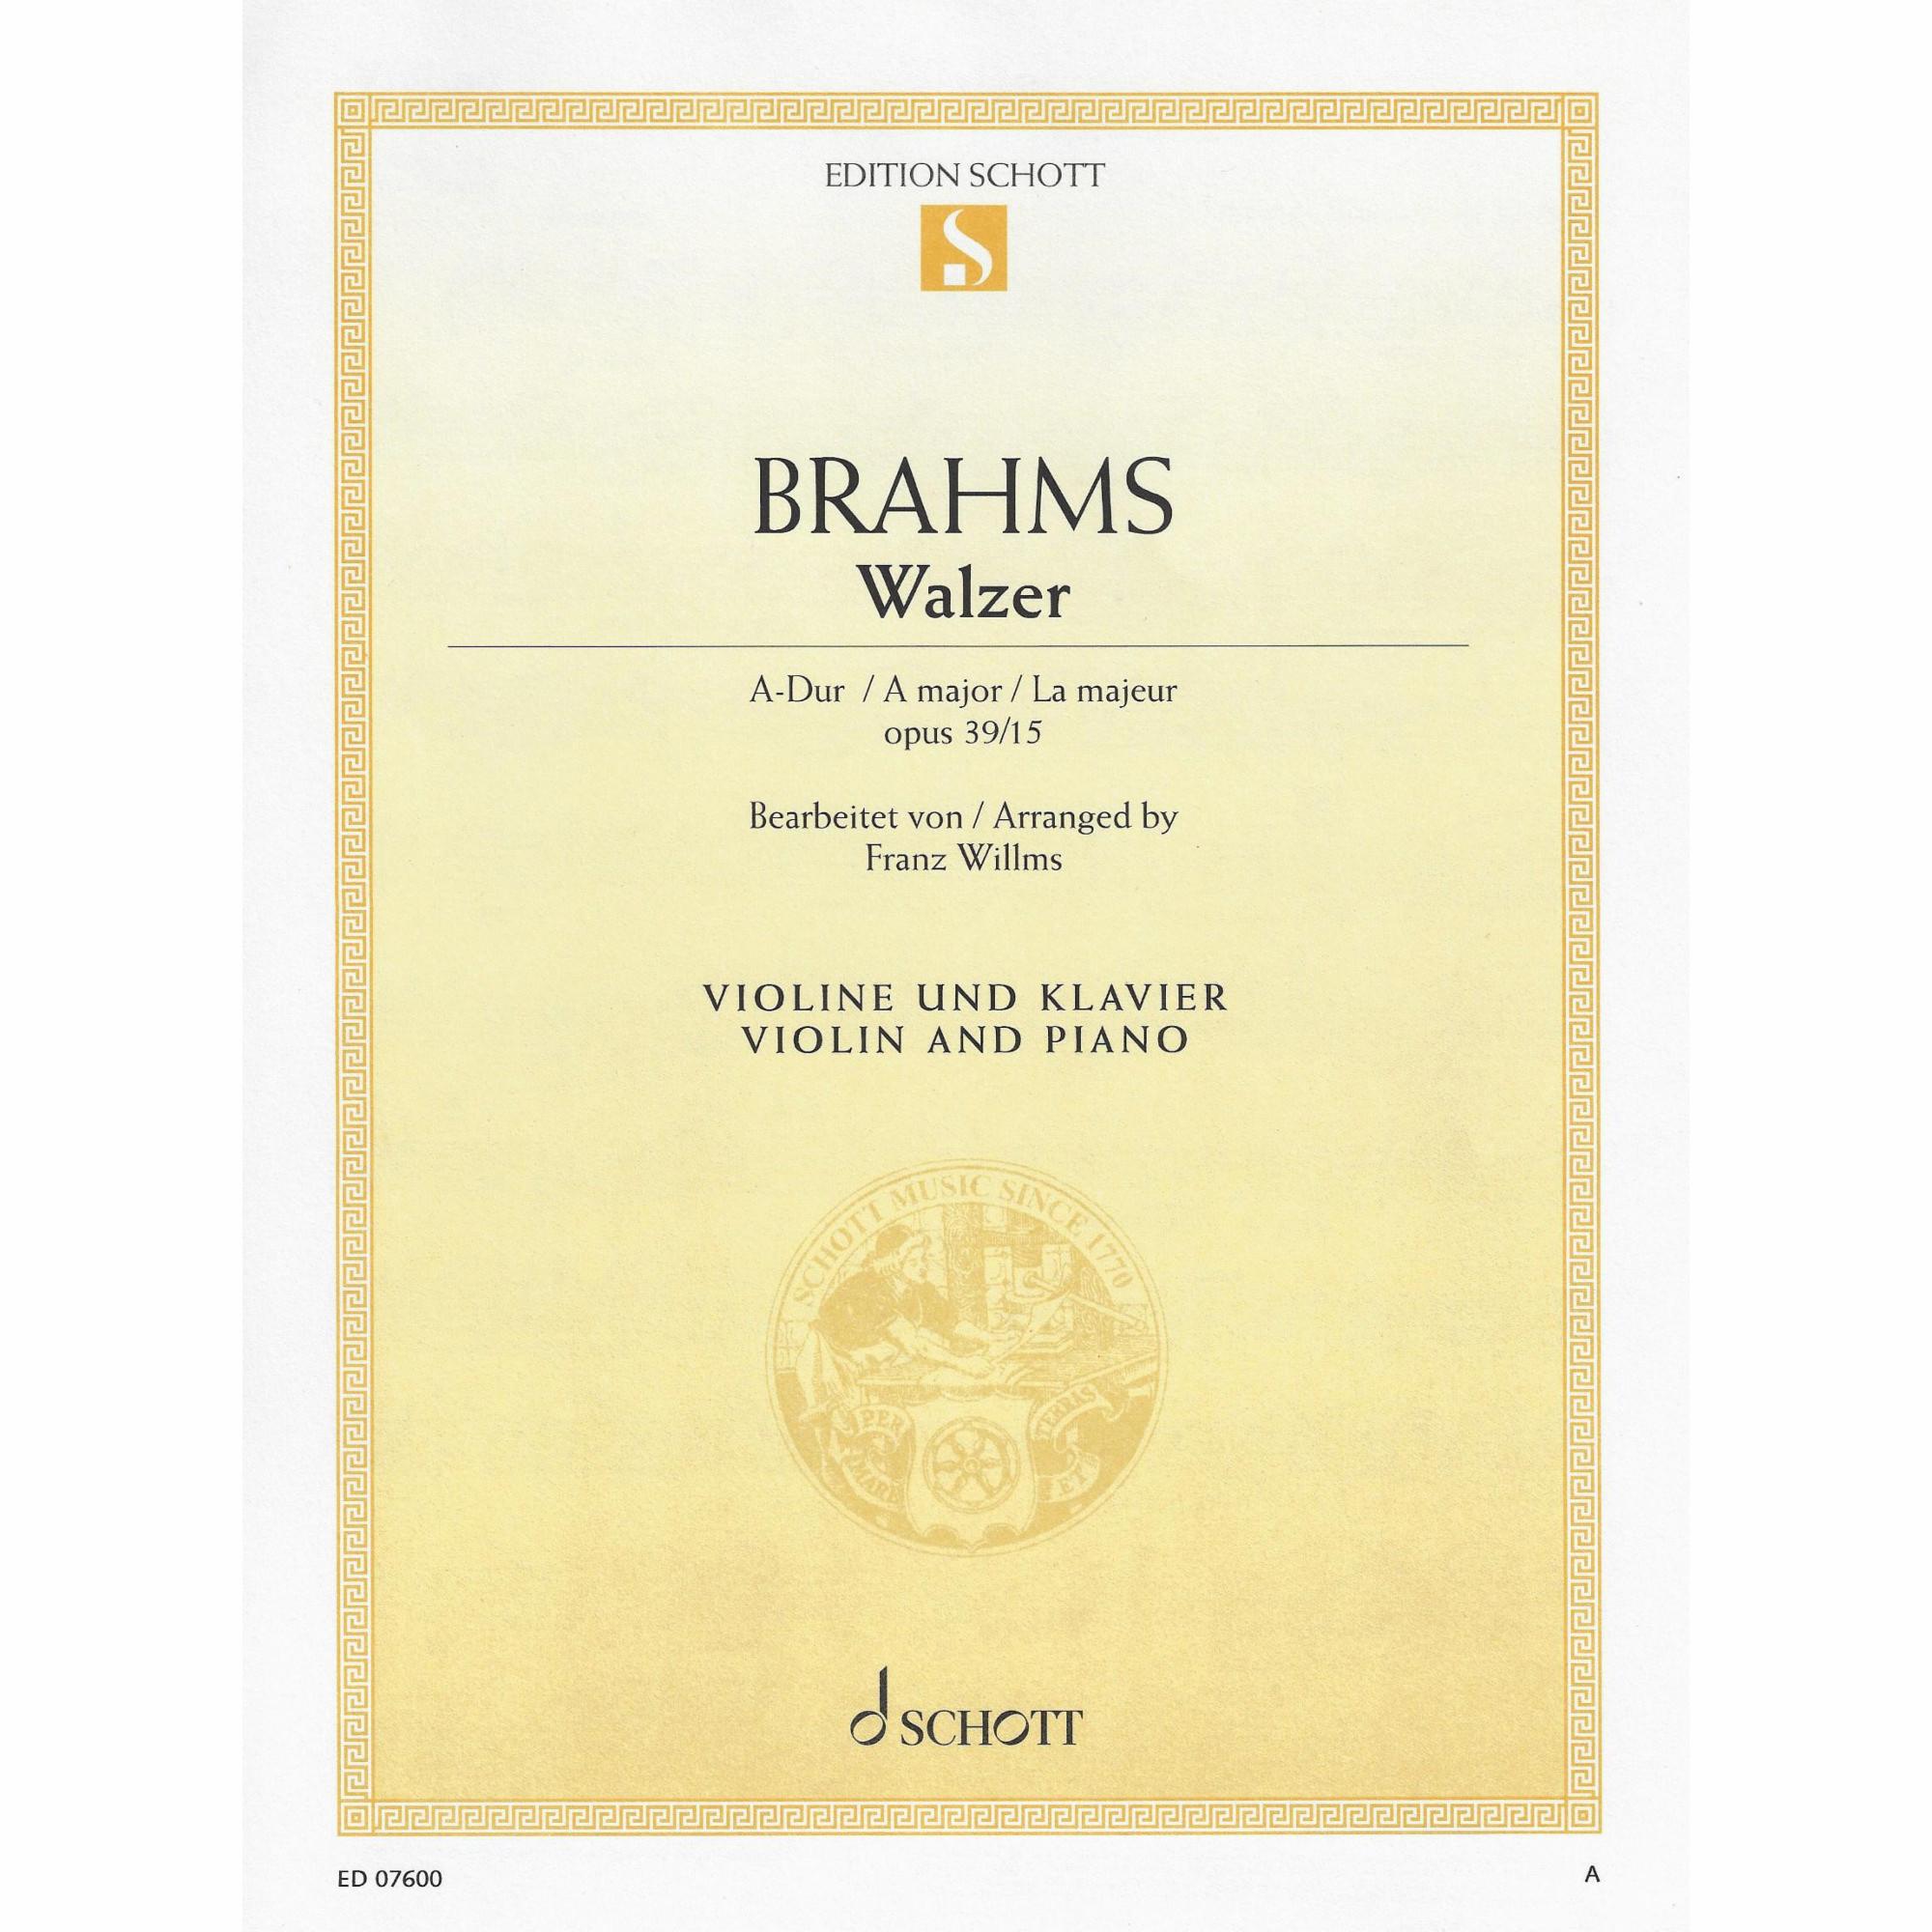 Brahms -- Waltz in A Major, Op. 39, No. 15 for Violin and Piano